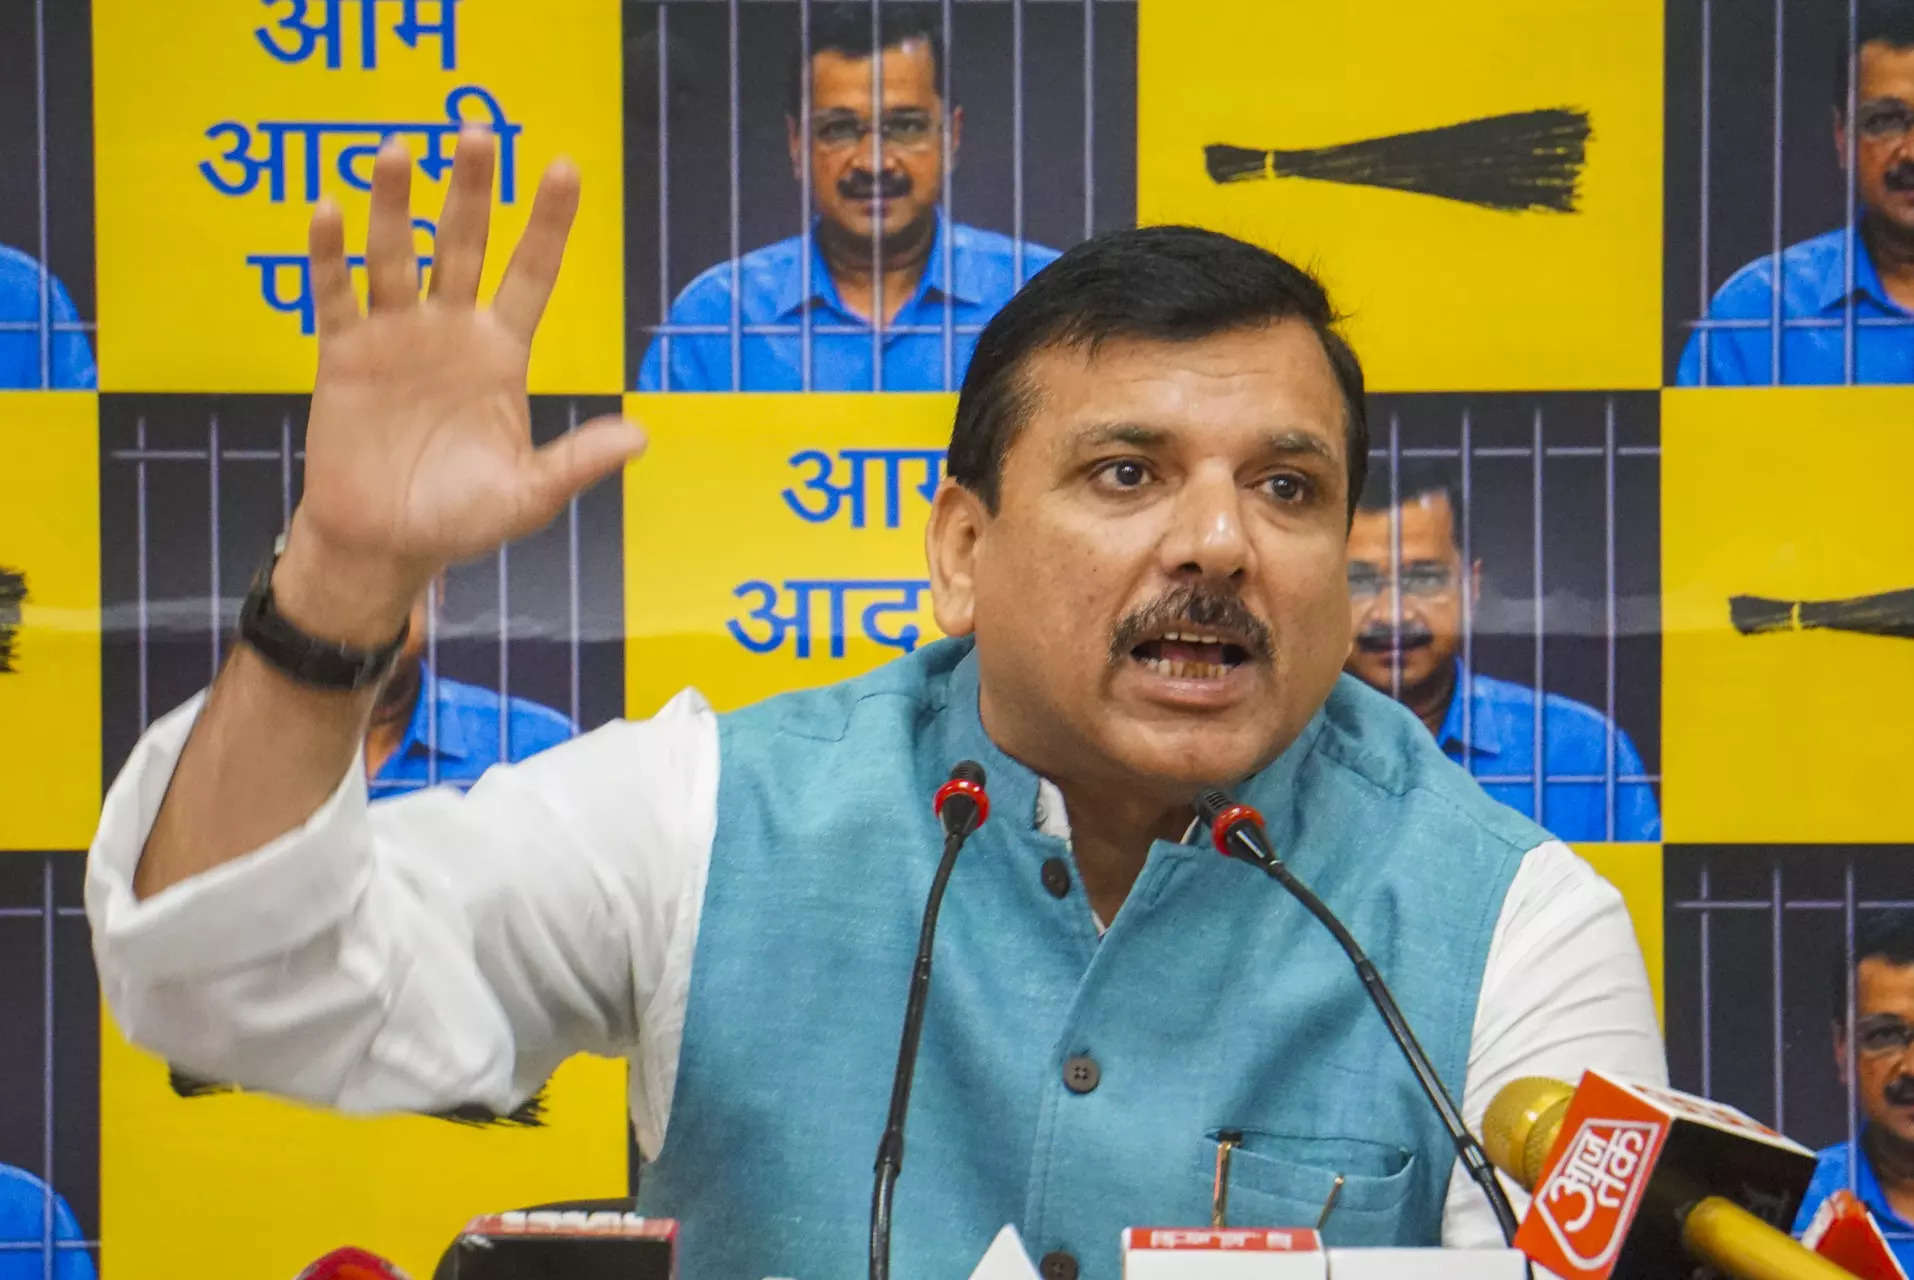 Anything can happen with Kejriwal in jail: AAP MP Sanjay Singh 